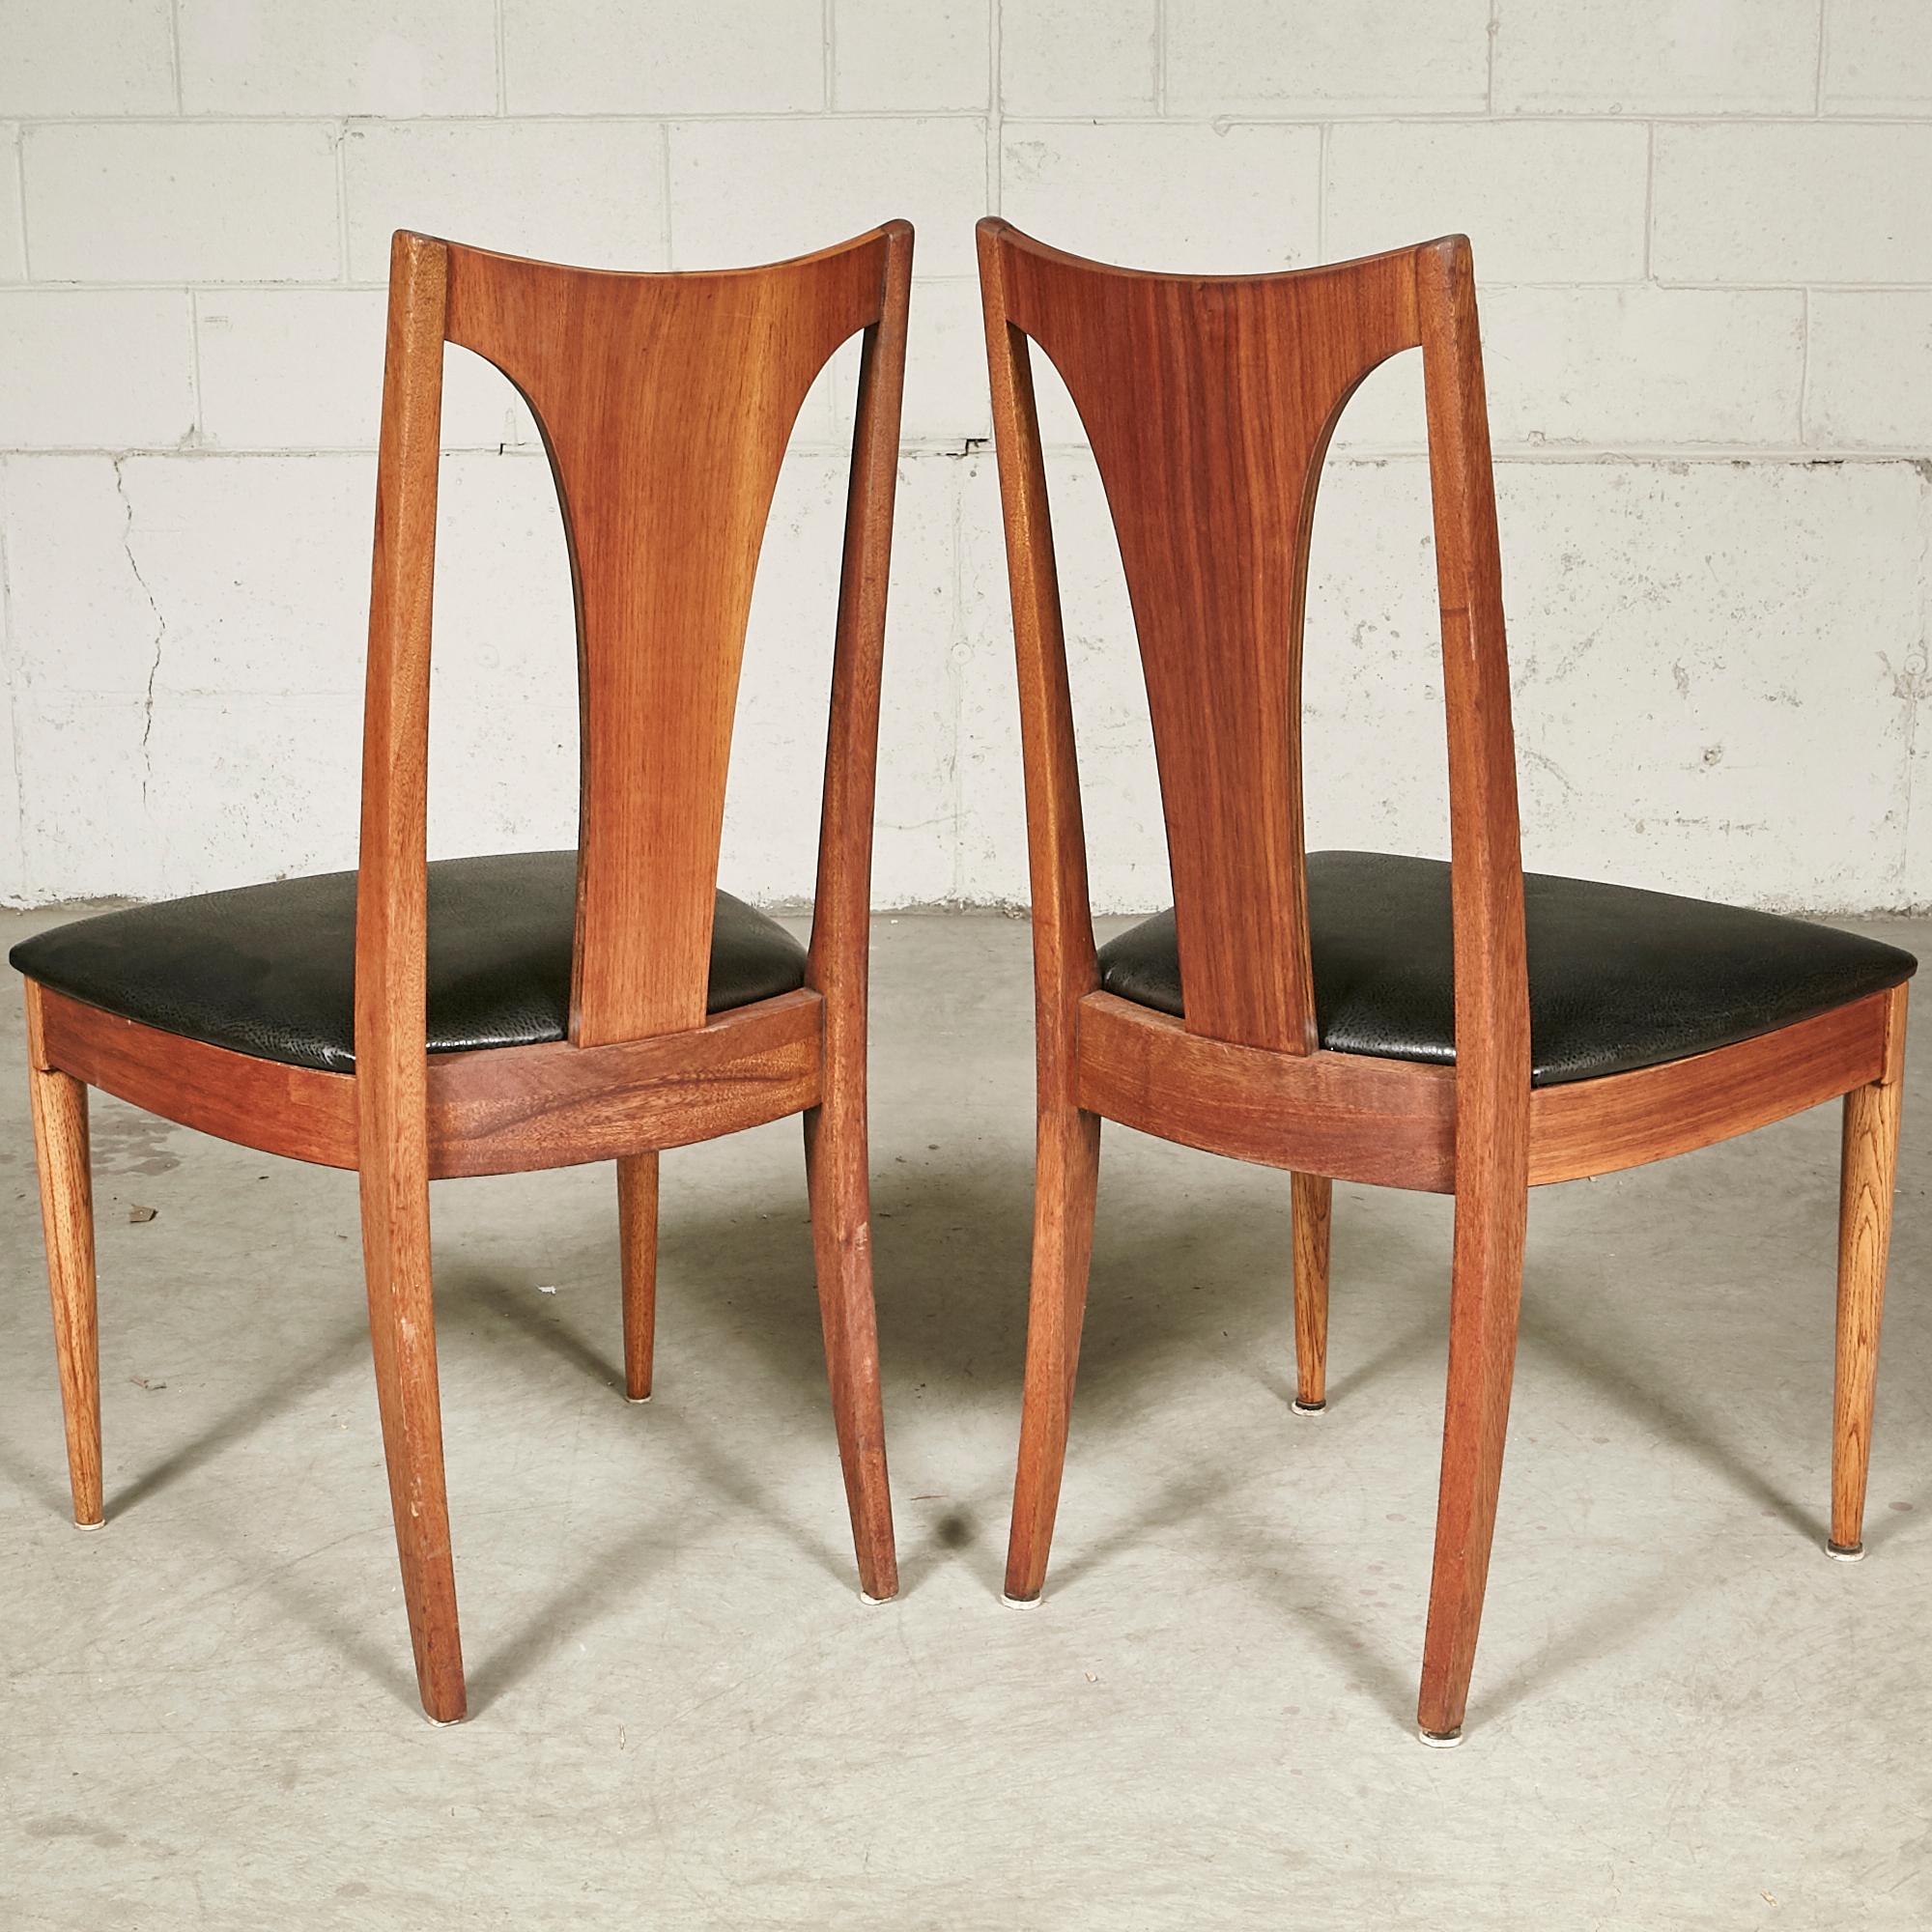 20th Century 1960s Brasilia-Style Dining Chairs, Set of 4 For Sale